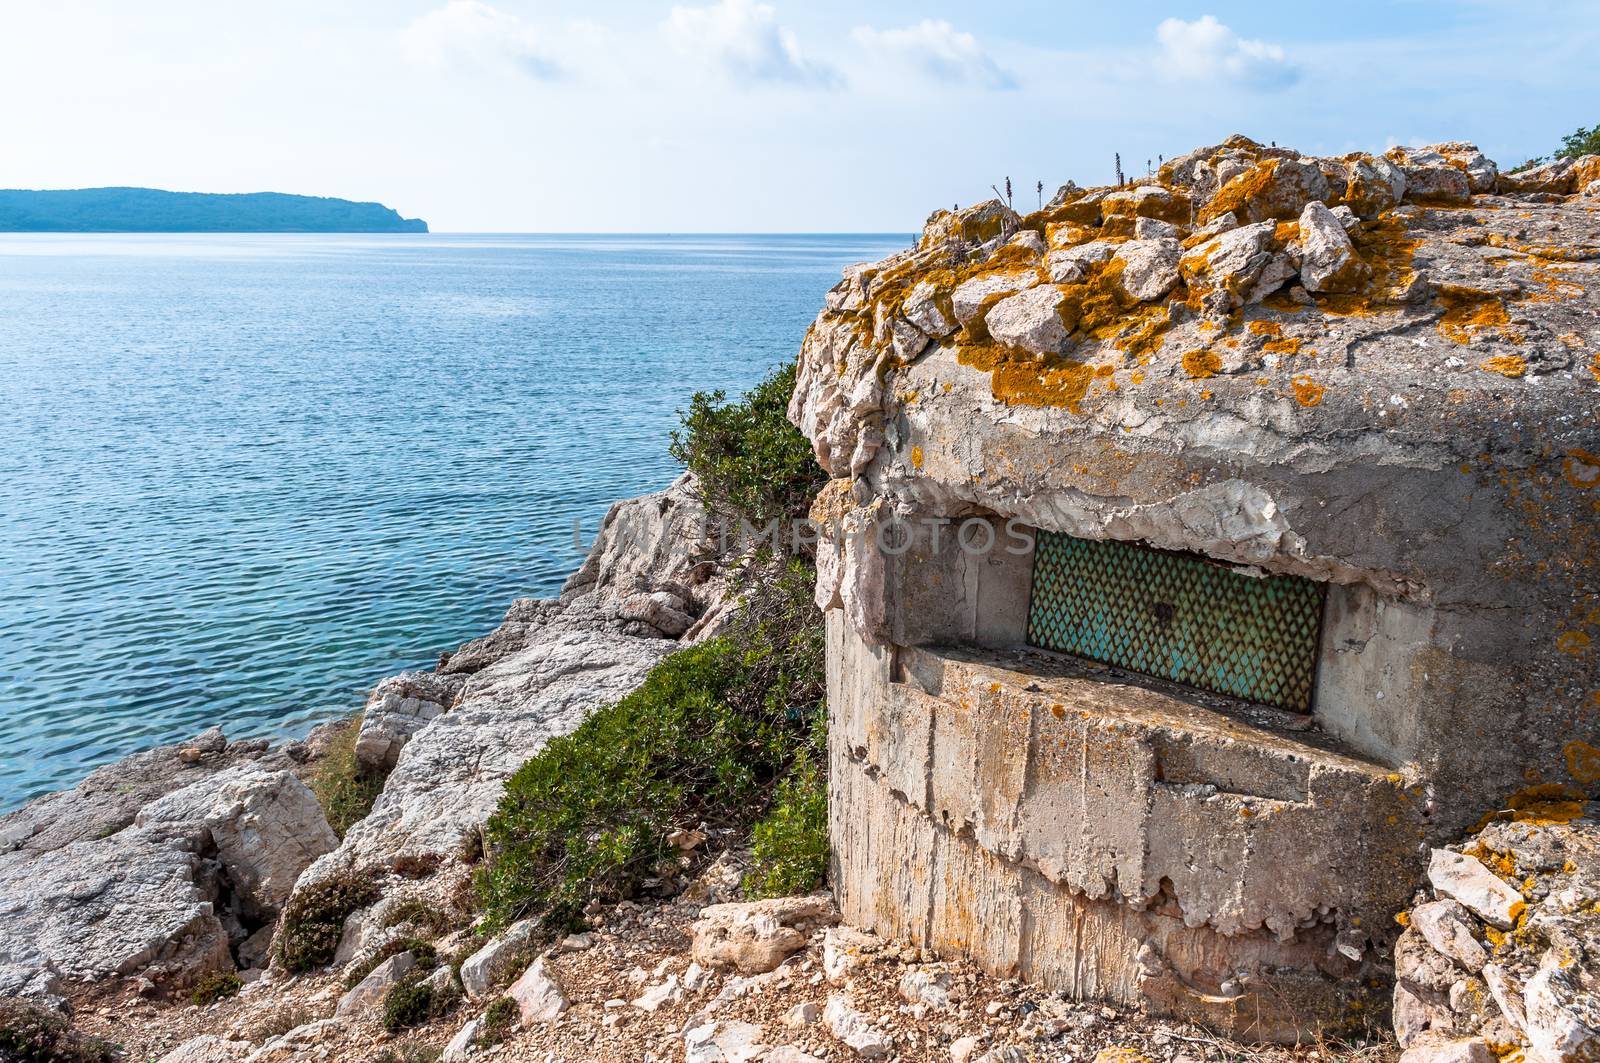 World war two bunker on Sardinia's coast in a cloudy day